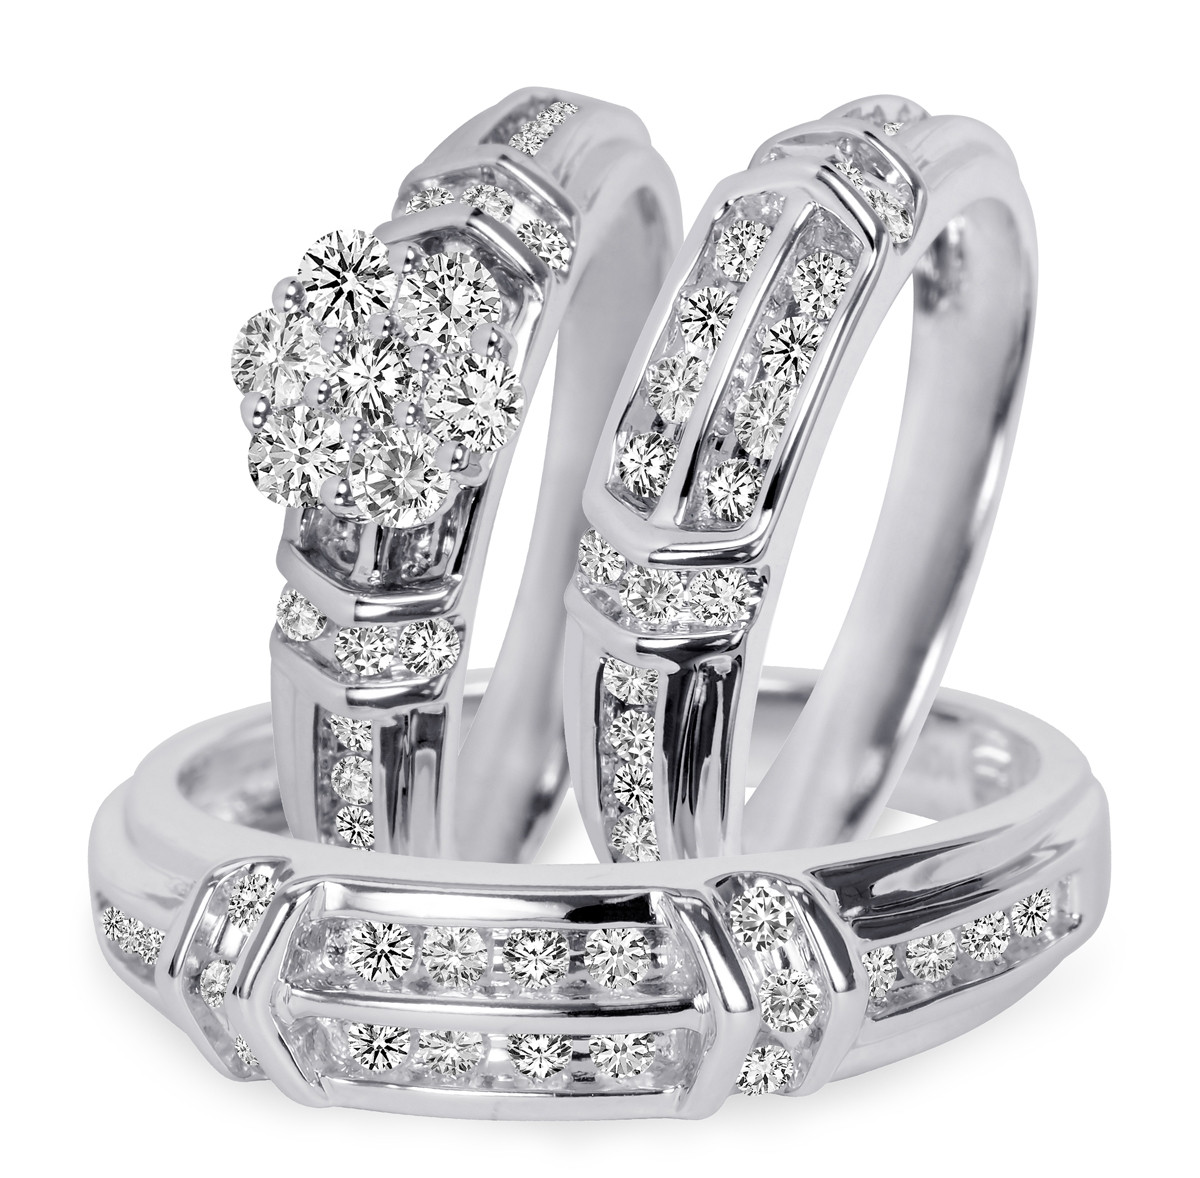 Wedding Rings Sets For Him And Her Cheap
 Awesome cheap his and hers wedding sets Matvuk